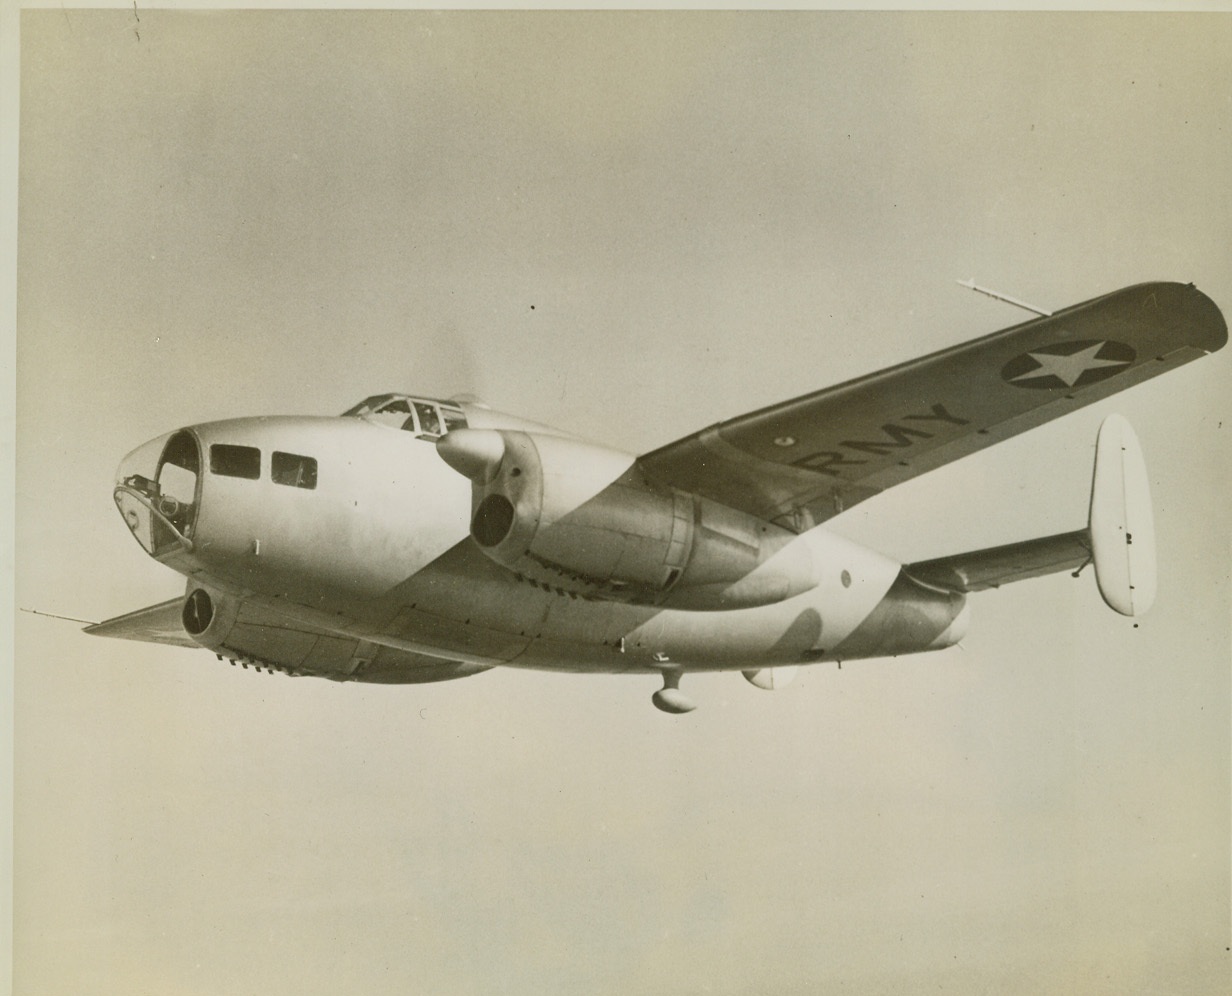 Plywood Training Plane, 2/22/1943. Burlington, N.C.—The only metal used in the Fairchild AT-21 (above) is in the engines, engine supports, instruments and certain other equipment supports. The rest of the five-beater plane is built of plastic bonded plywood. It is in the 200-miles-per-hour class and was designed primarily to train gunner crews to work as a team. It’s made by Fairchild Aircraft, Burlington. Credit: ACME;